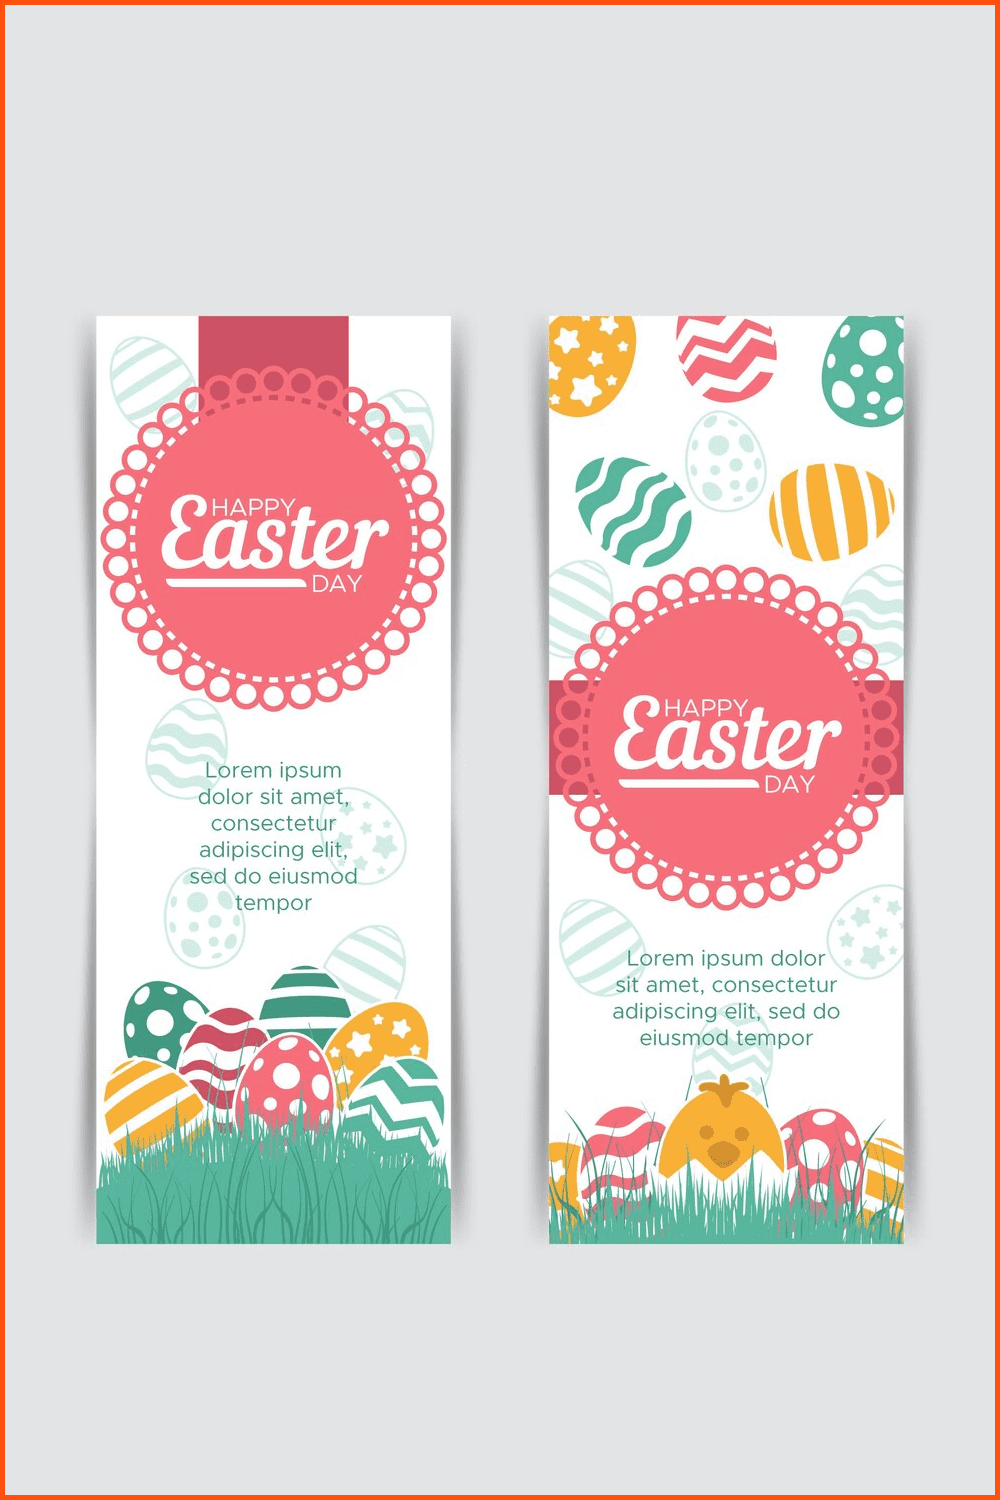 Creative Easter banners.